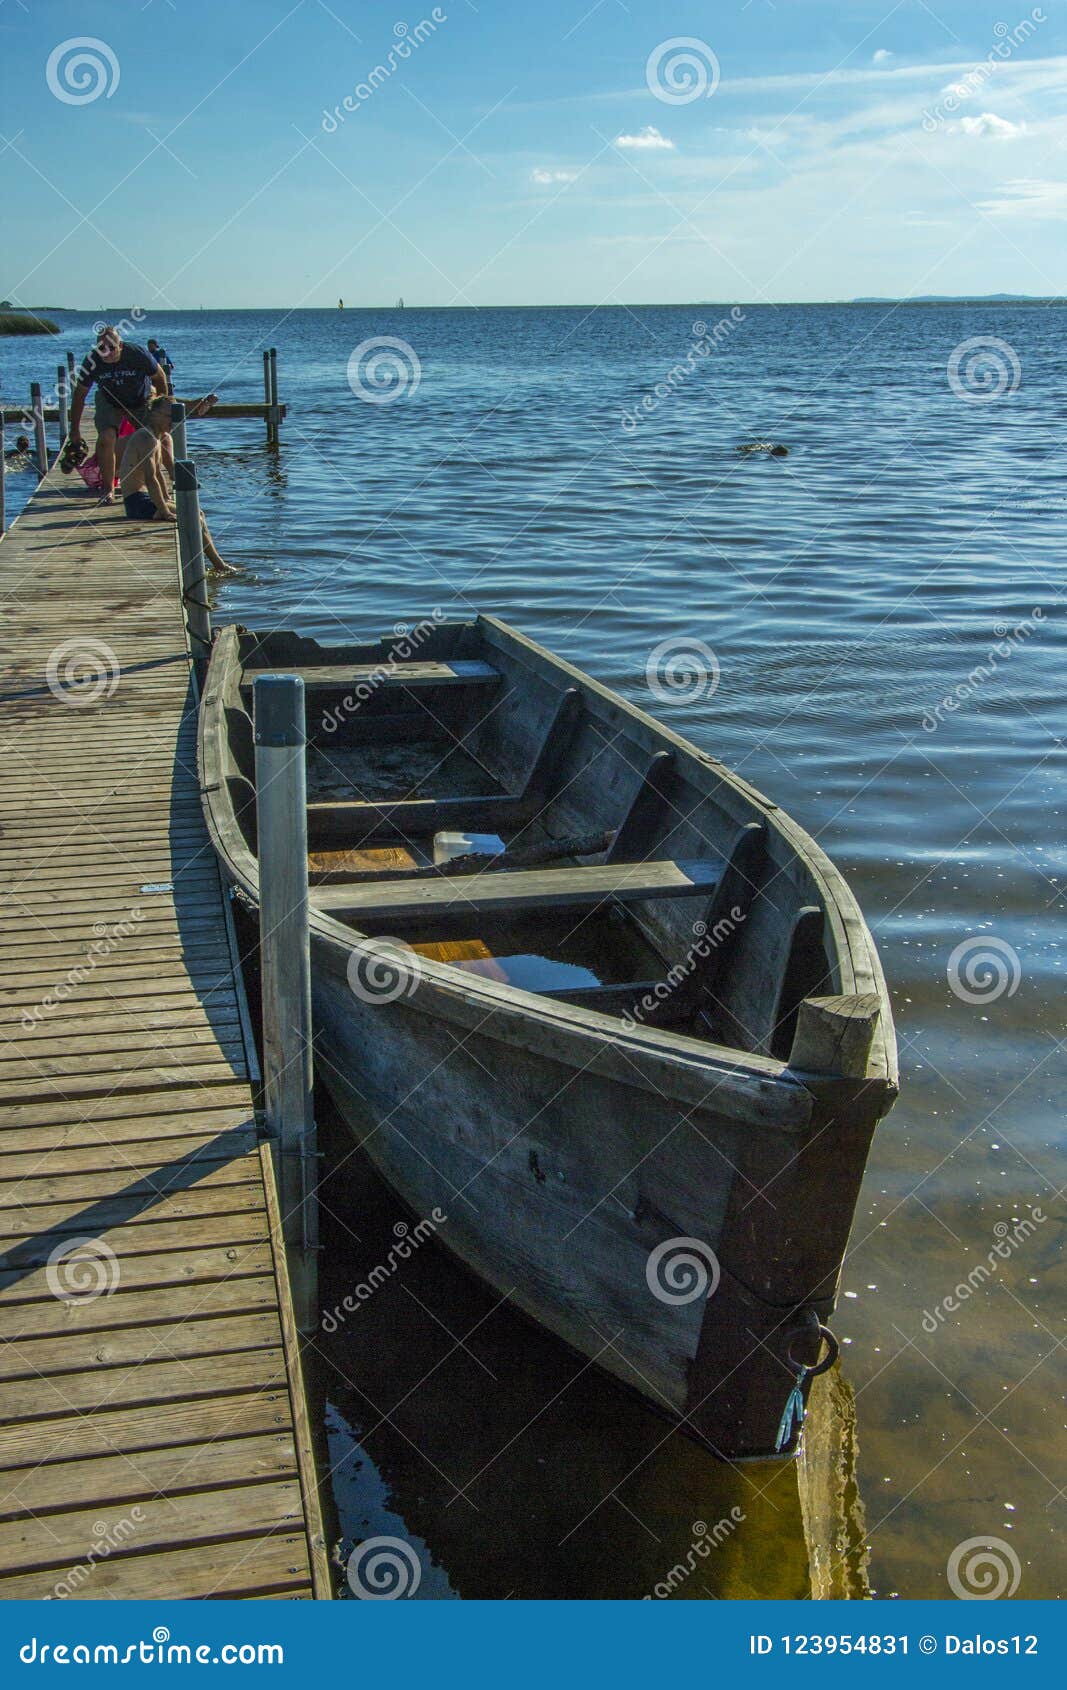 Summer Landscape with Wooden Fishing Boats by the Lake Stock Image